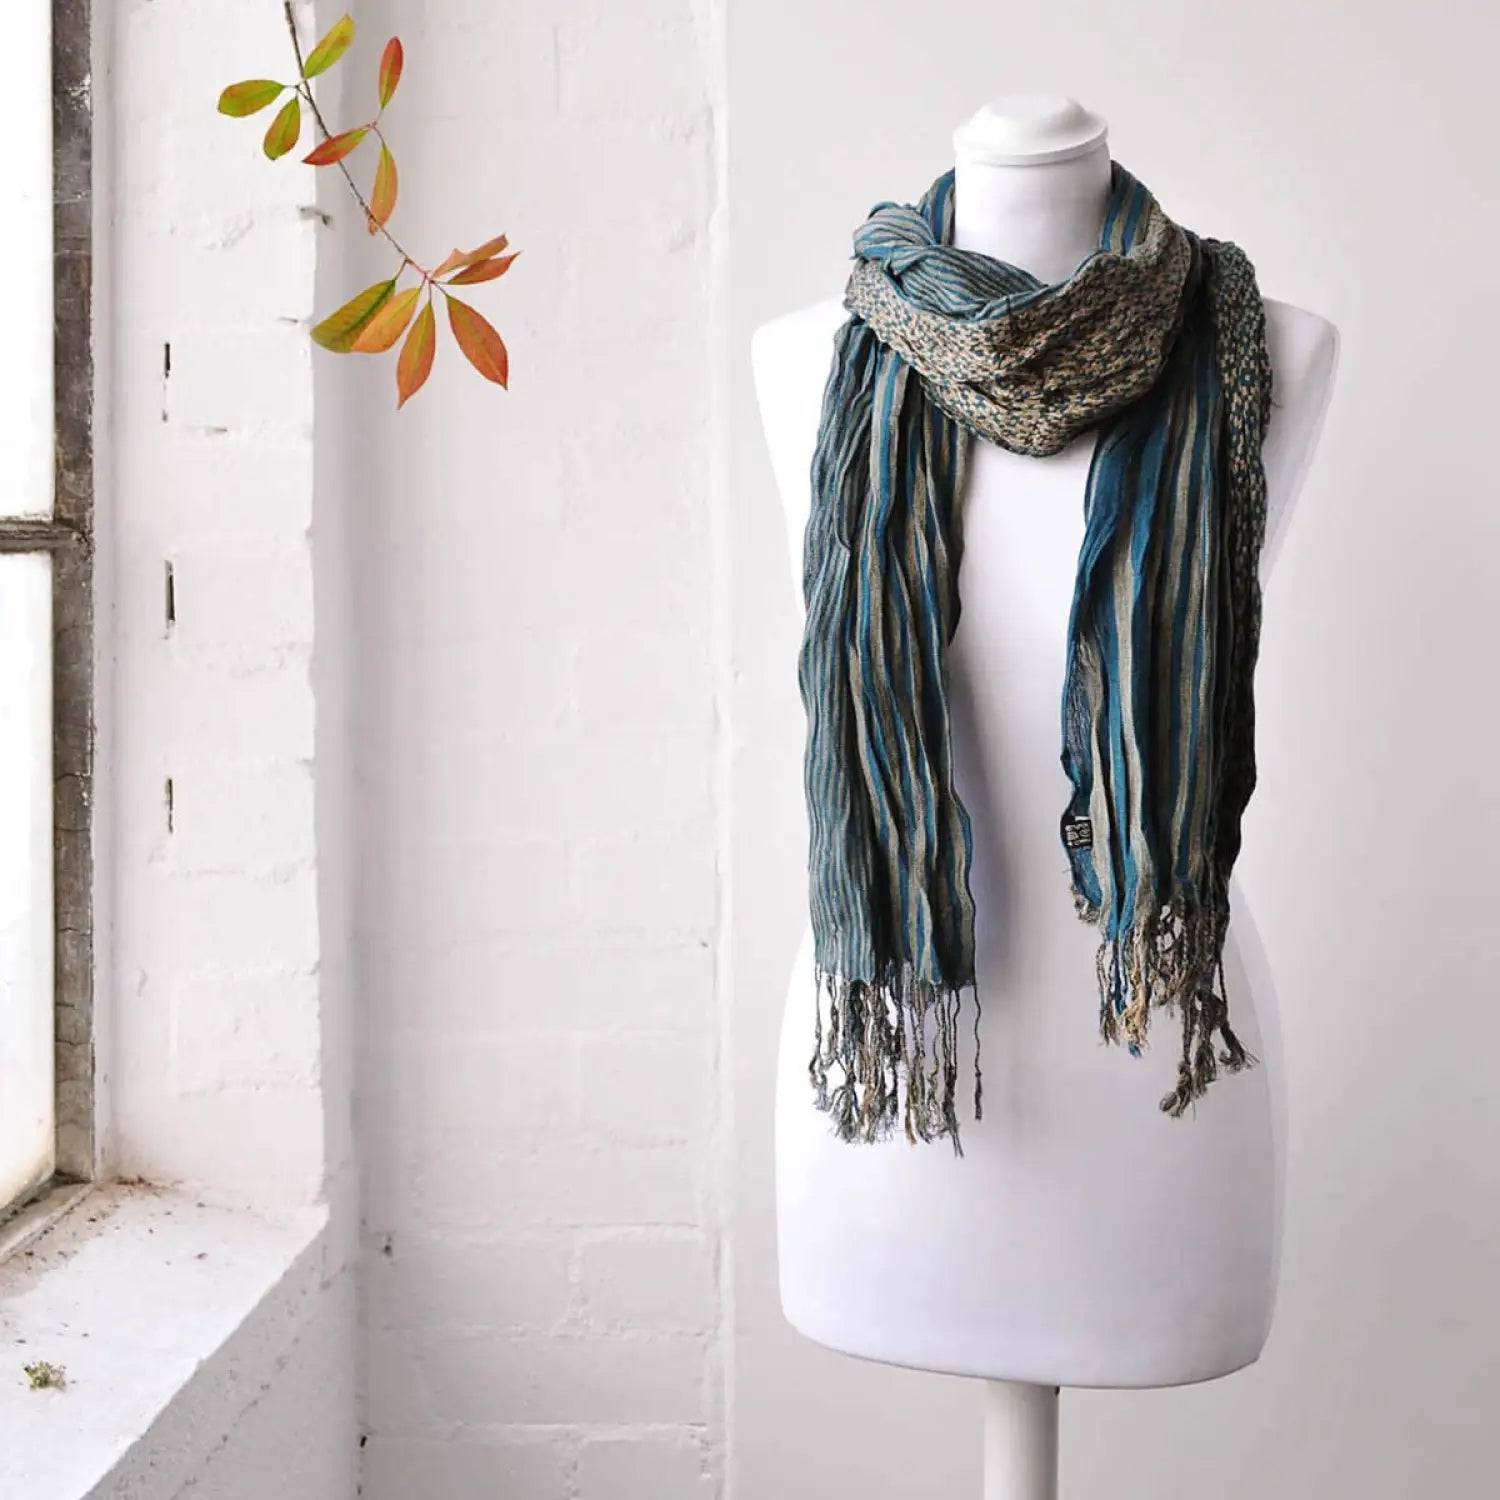 Mannequin showcasing Elegant Striped Woven Winter Scarf with playful bobble detail_near window